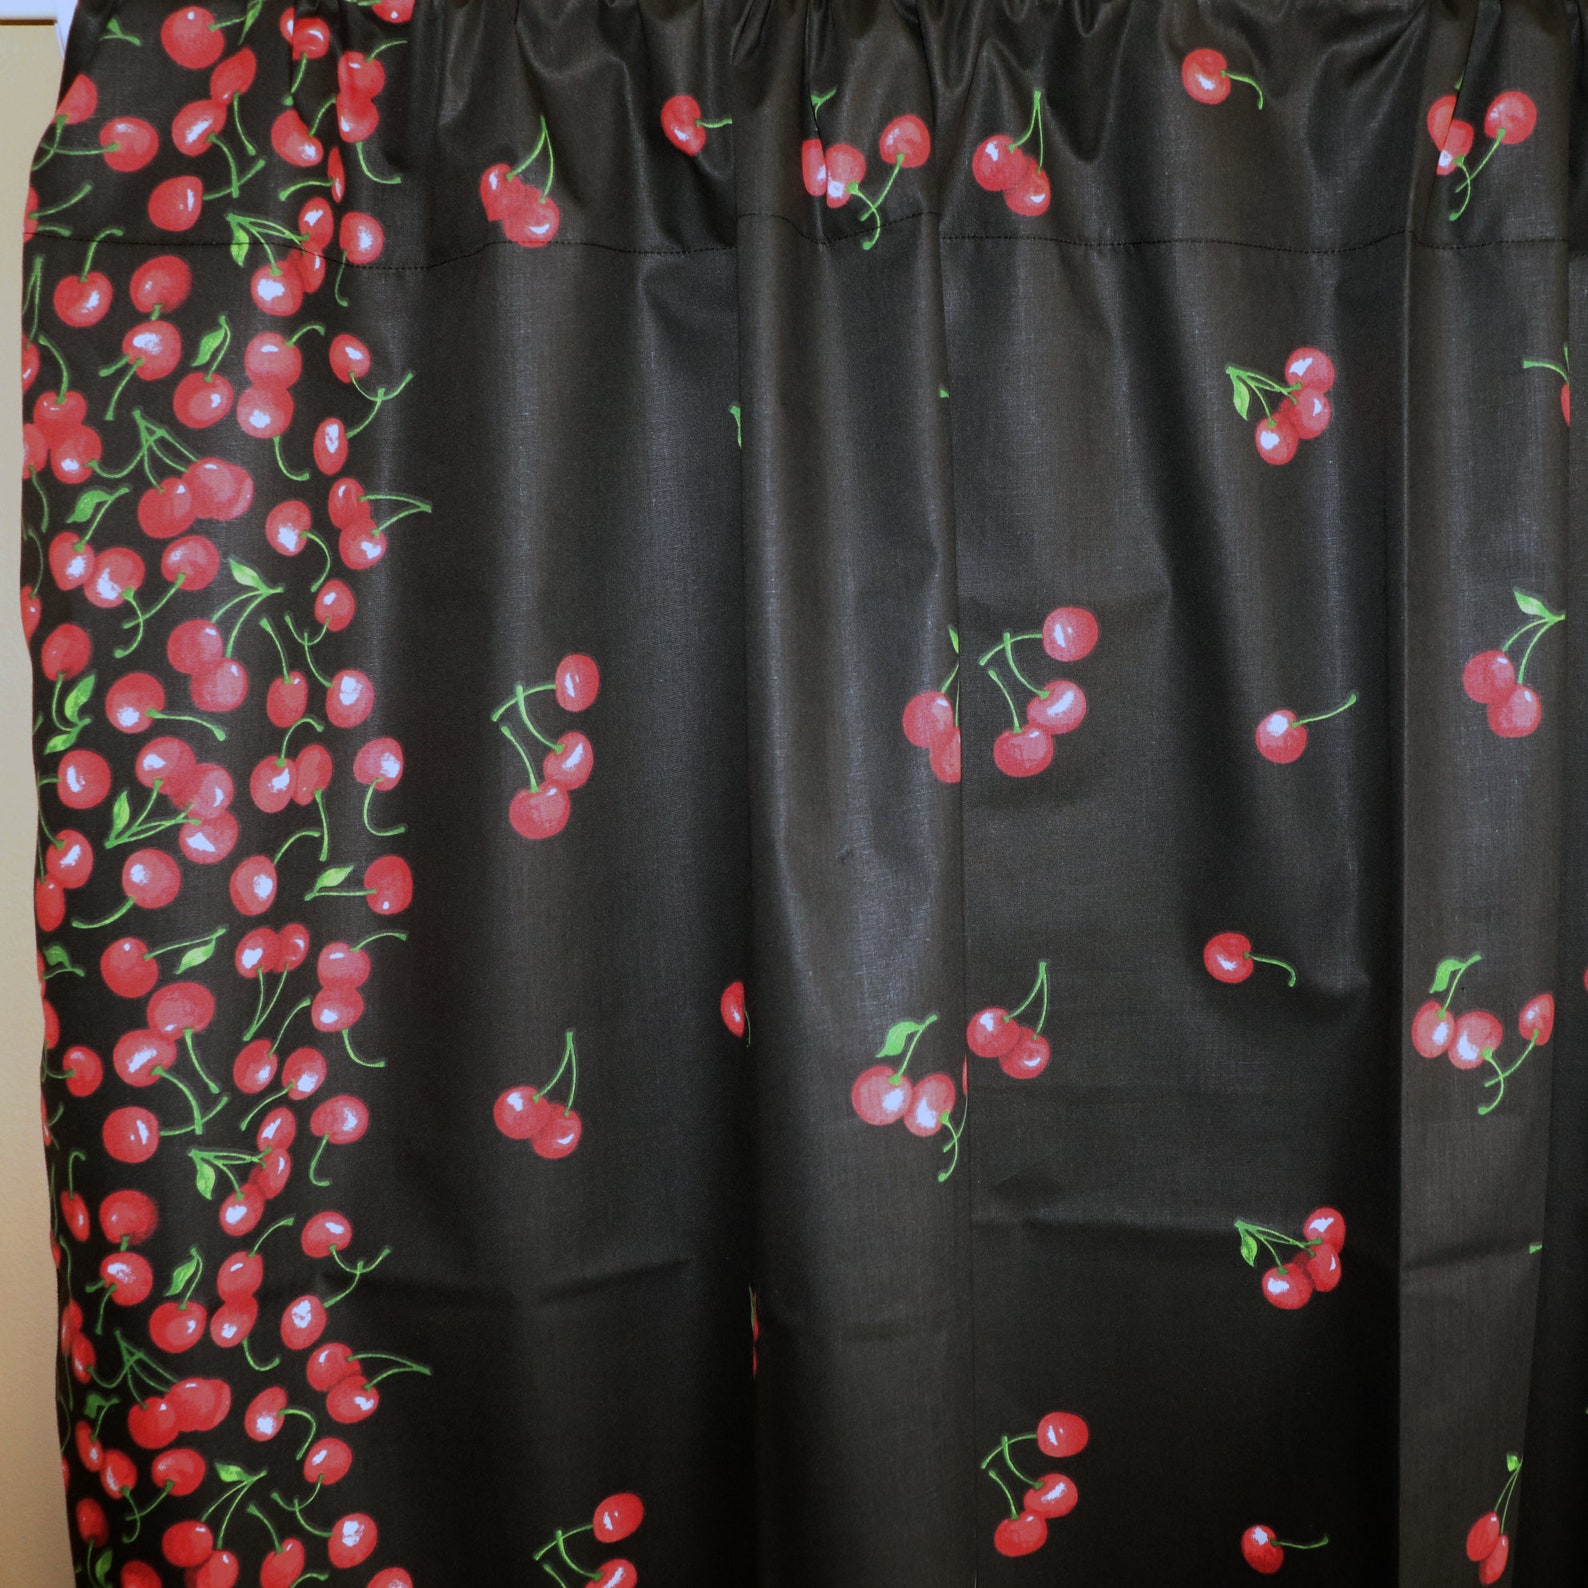 Cherries on Border Black Cotton Curtain Panel 58 Inch Wide / - Etsy